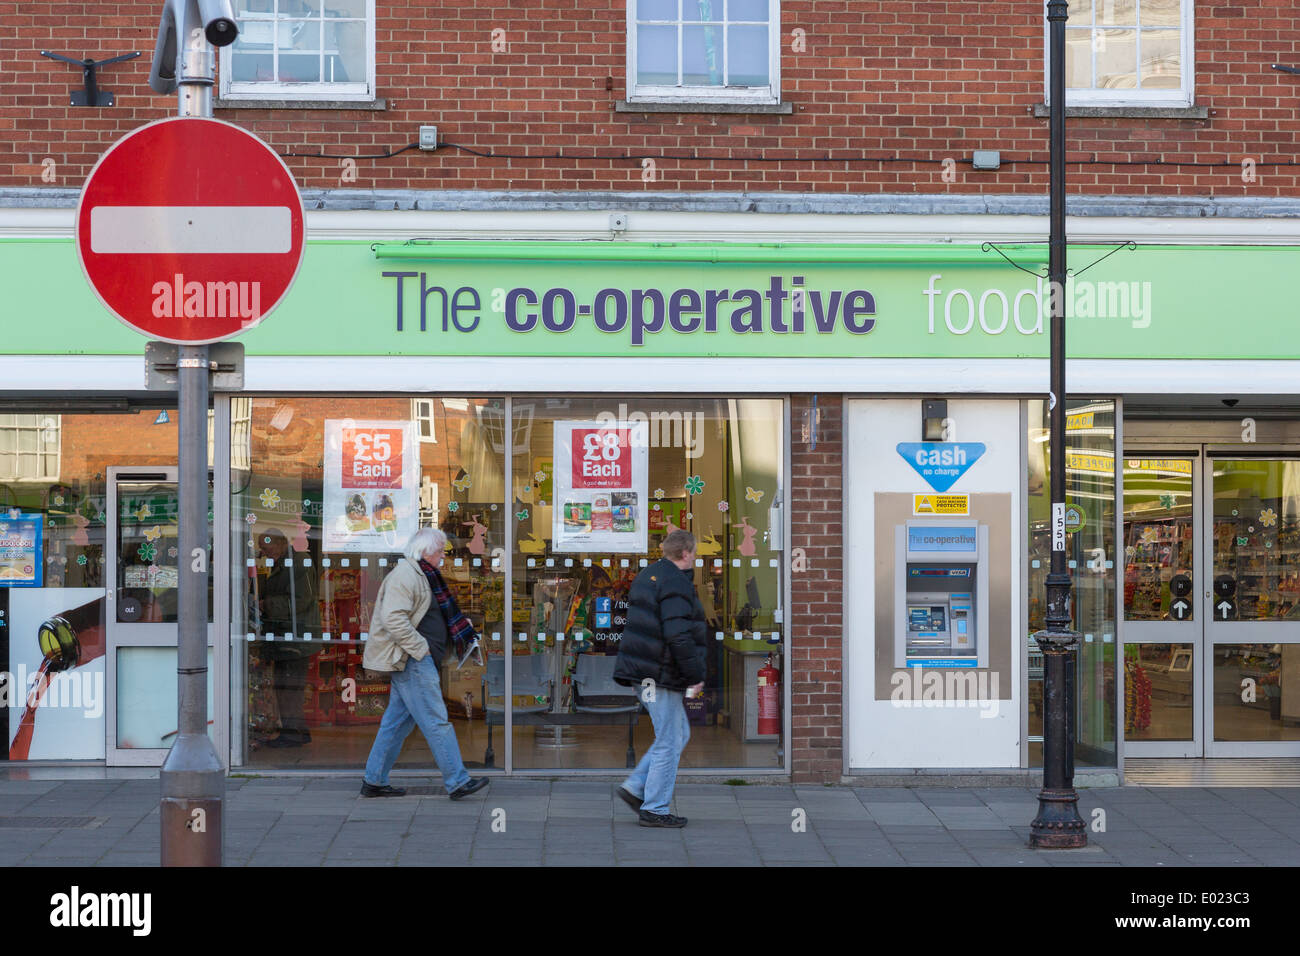 The front of a Co-Op food store in Dereham, Norfolk Stock Photo